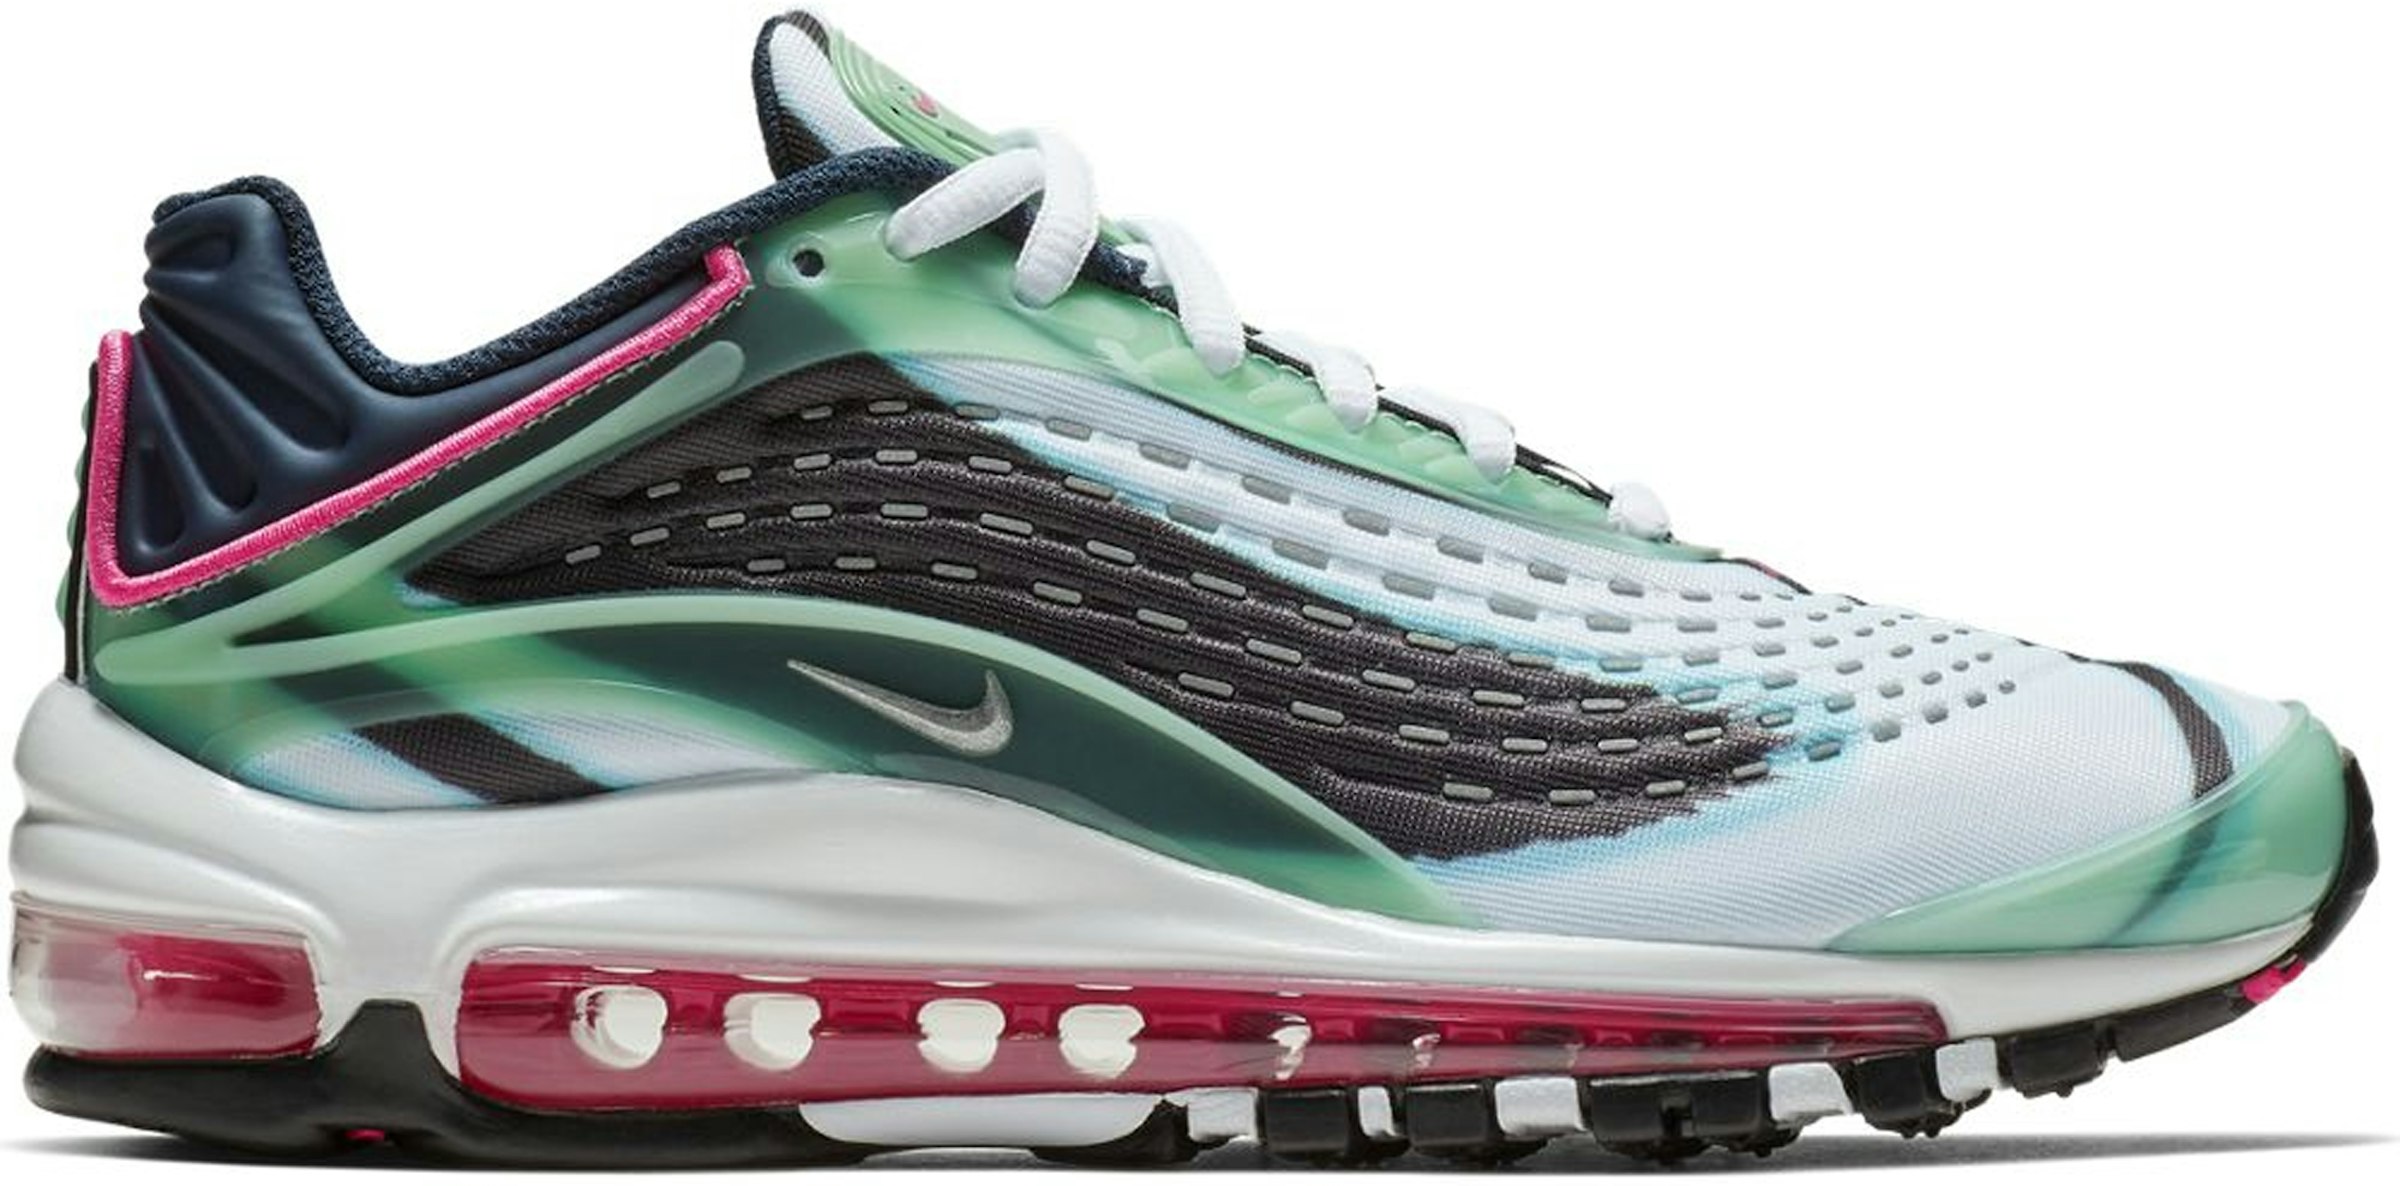 Nike Air Max Deluxe Green (GS) Kids' - AR0115-301 - US